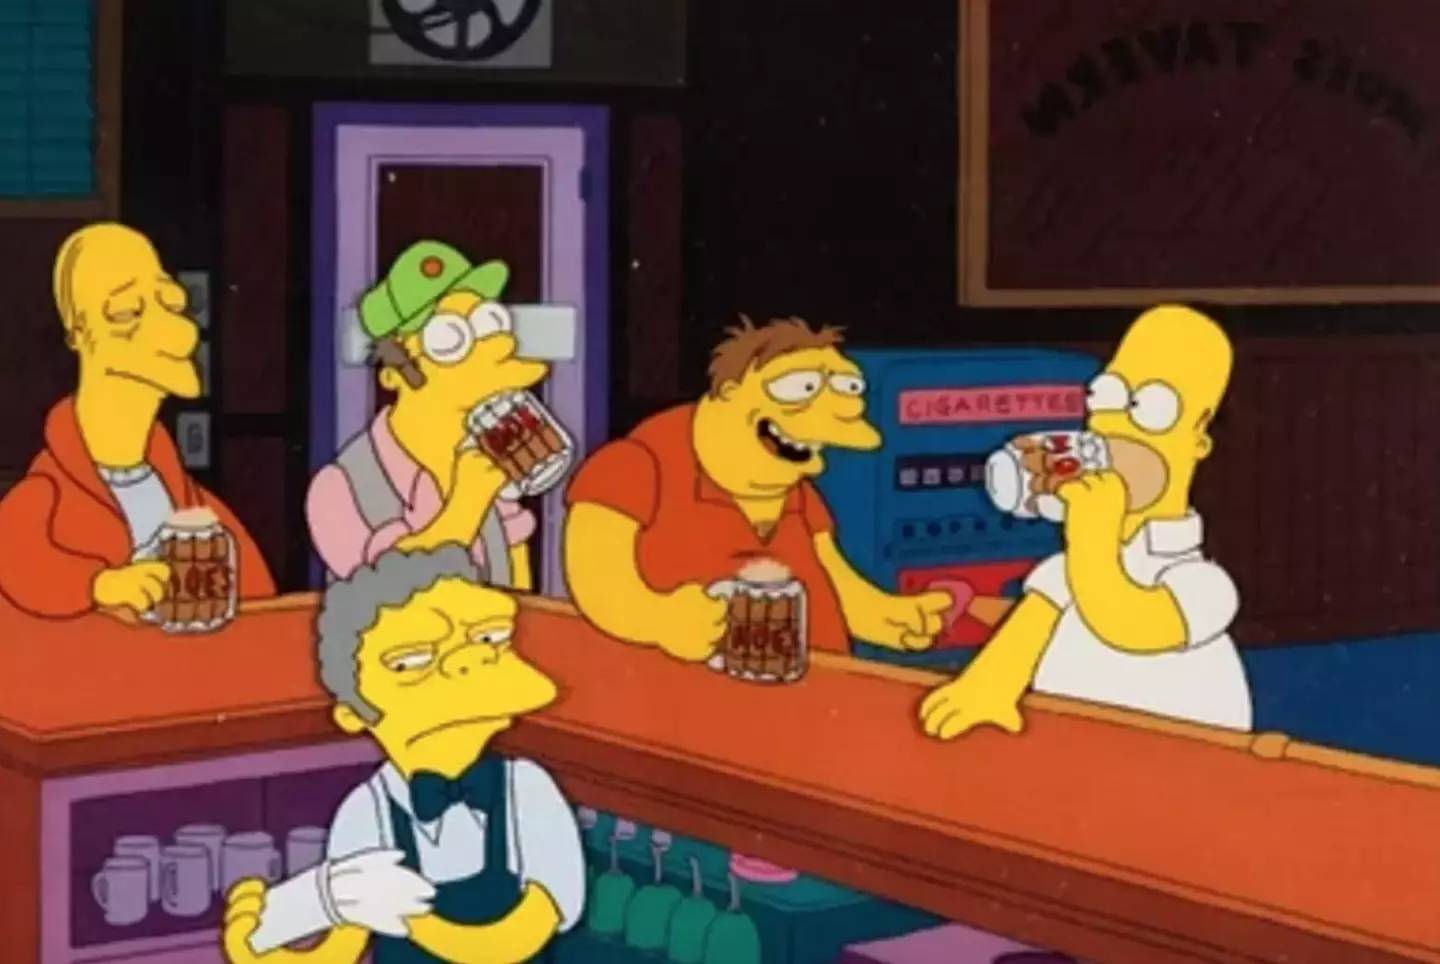 Fans were left gutted after The Simpsons producers killed off longtime character Larry the Barfly.